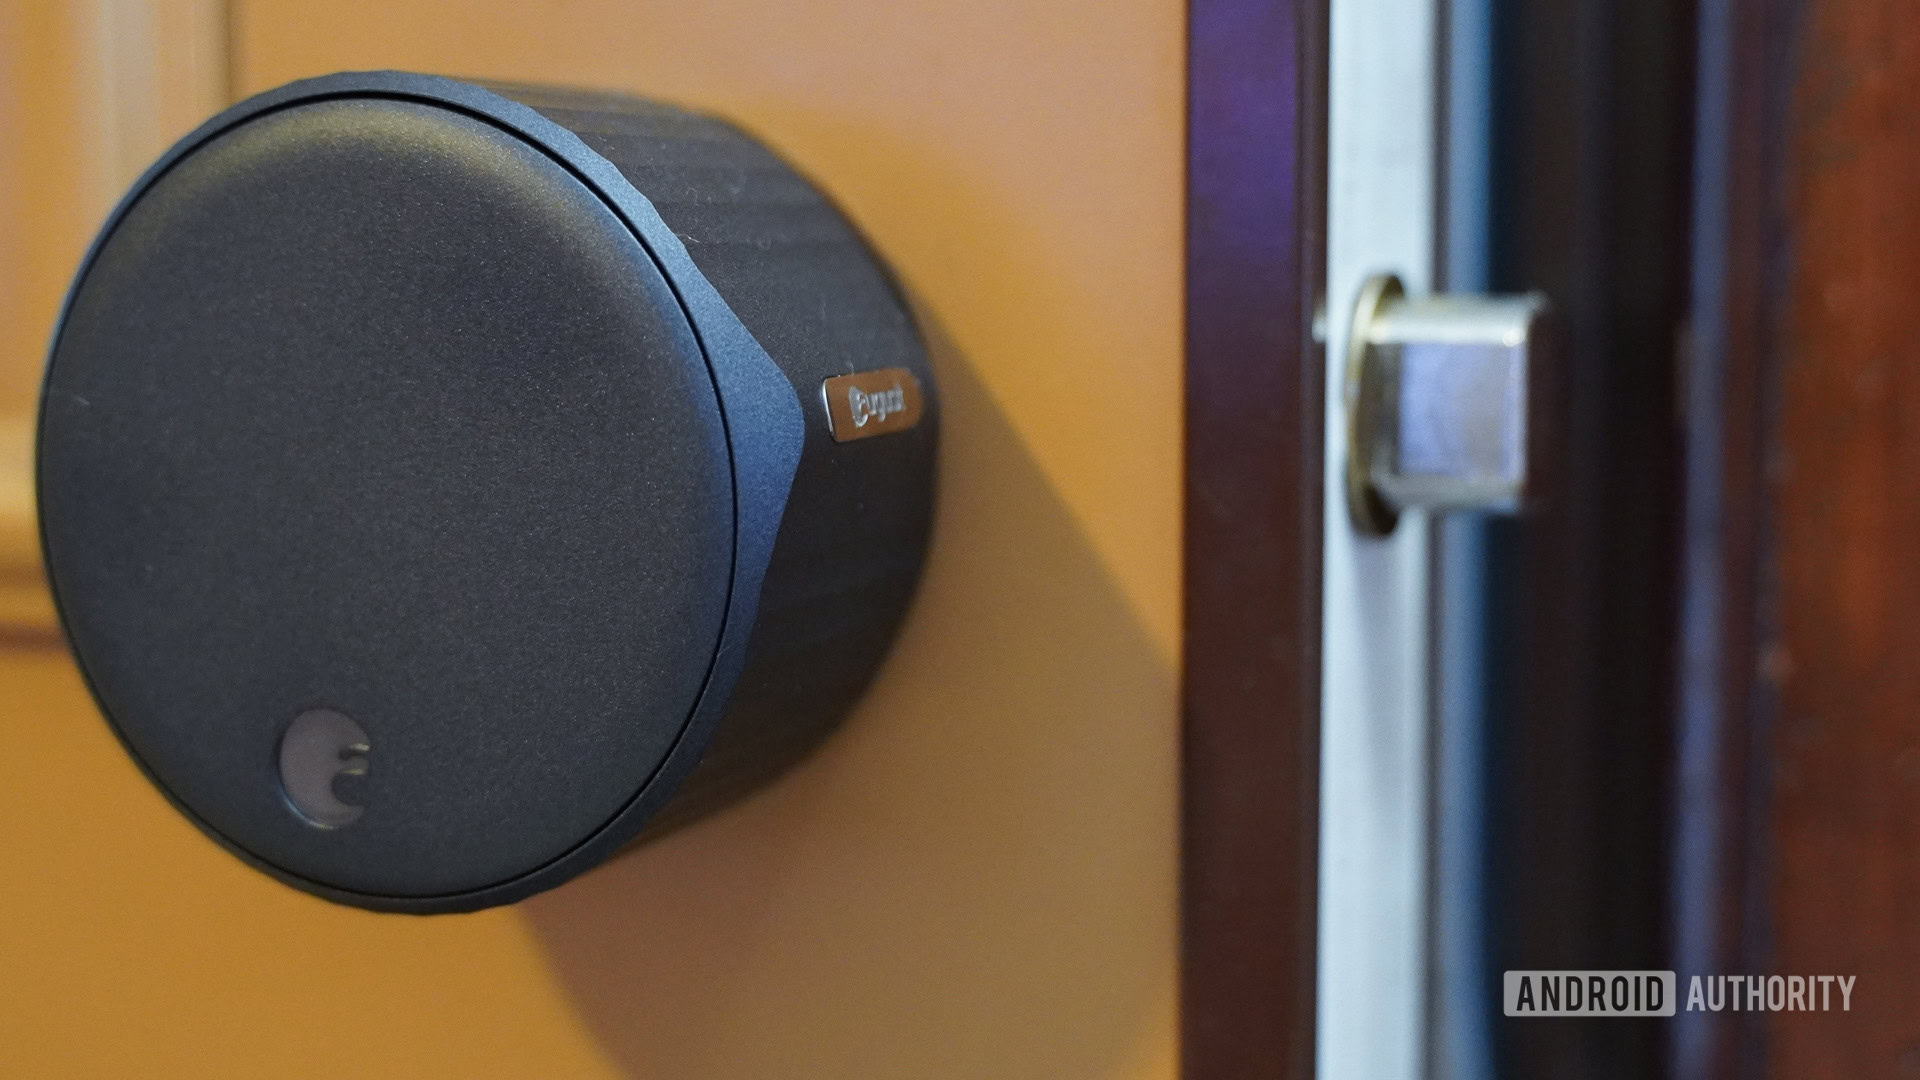 August smart lock assembled view with bolt